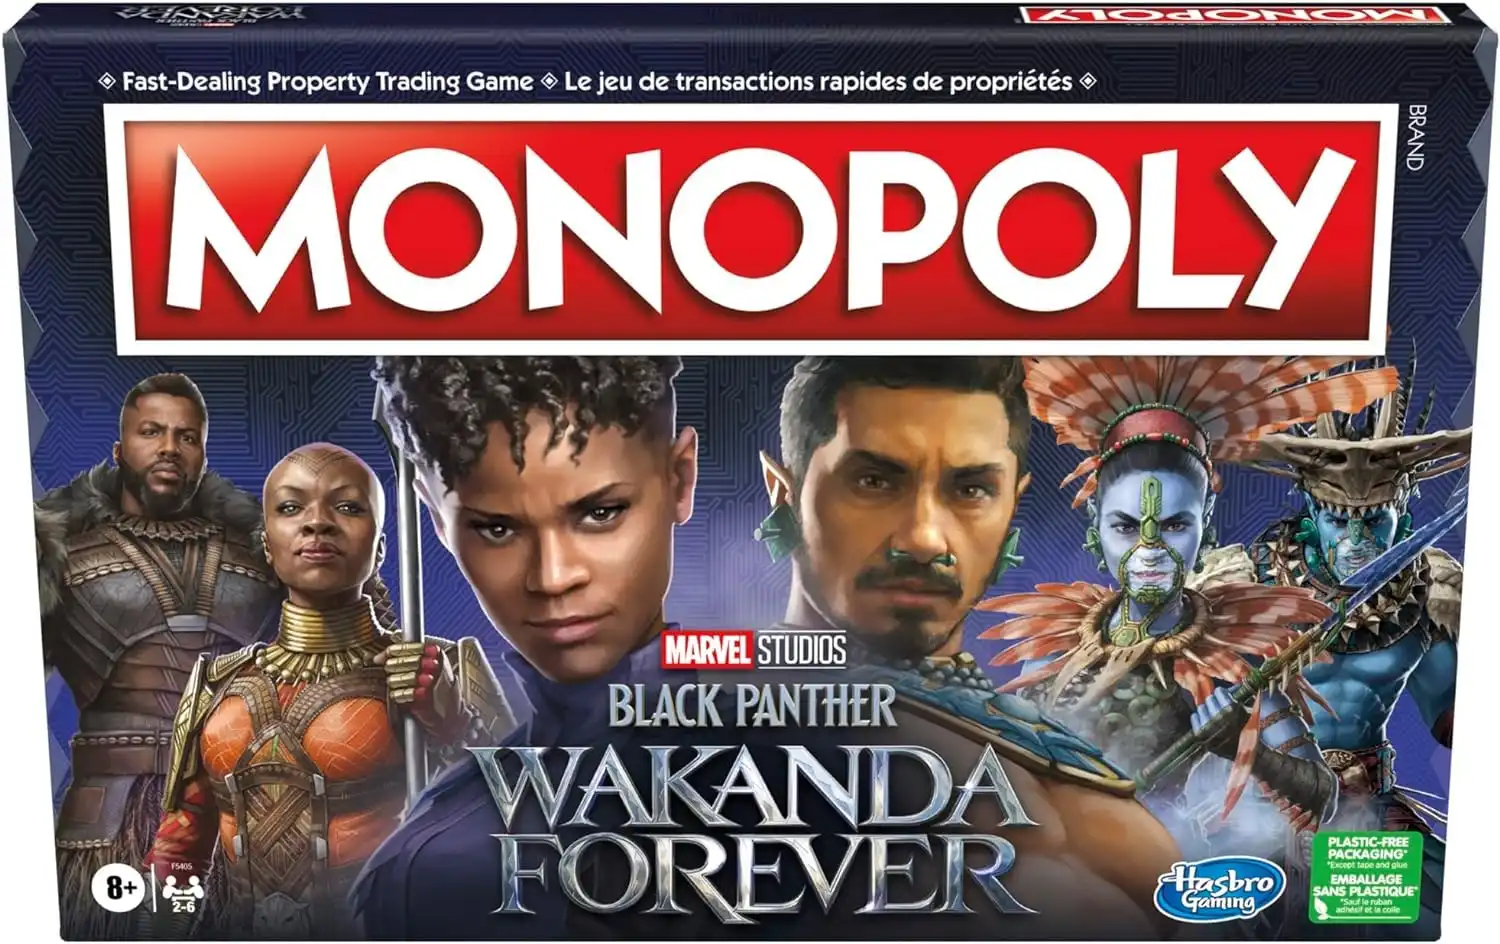 Monopoly: Marvel Studios' Black Panther: Wakanda Forever Edition Board Game